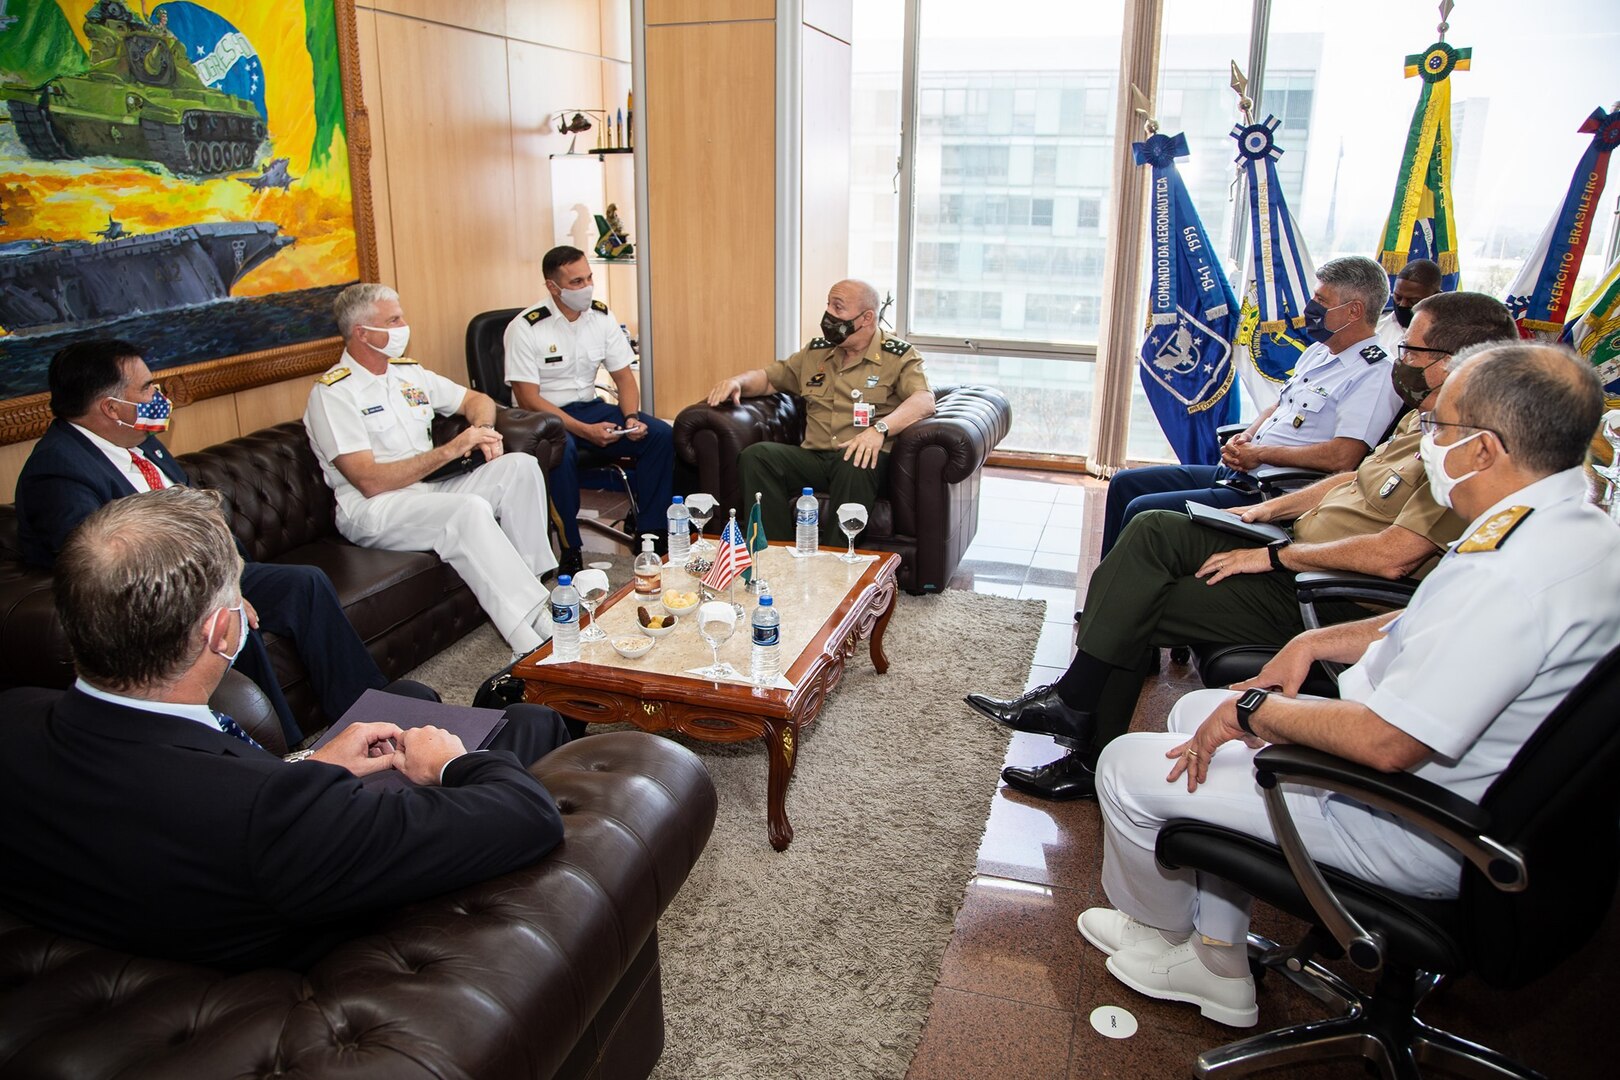 U.S. Navy Adm. Craig S. Faller, commander of U.S. Southern Command, meets with Brazil's Chief of the Joint Armed Forces Staff, Gen. Laerte de Souza Santos.